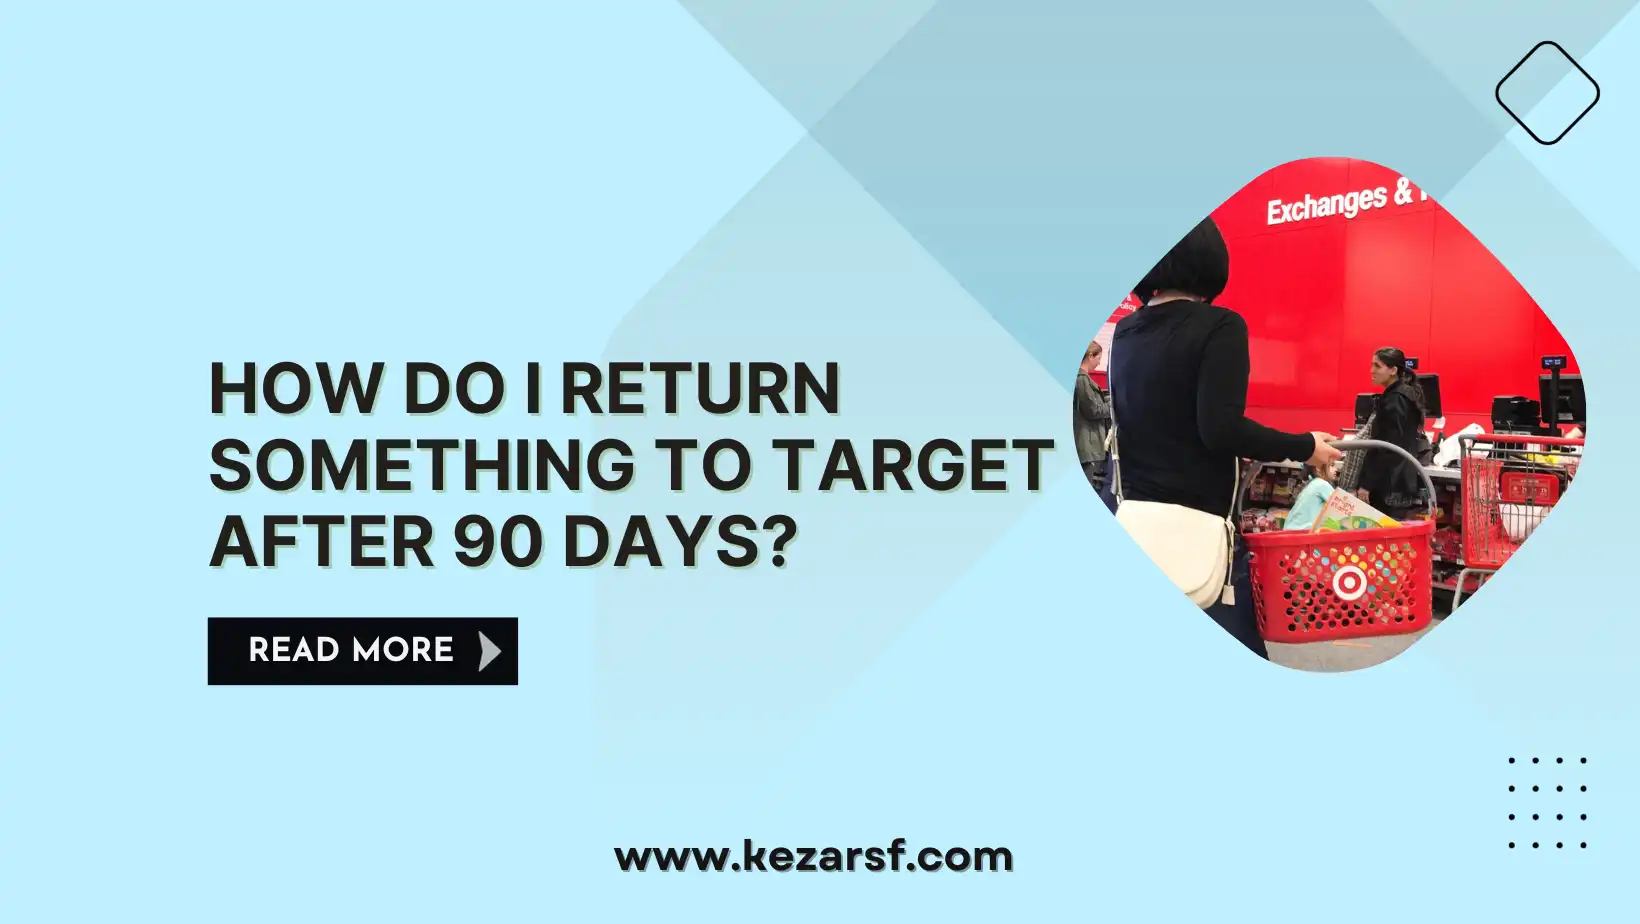 How Do I Return Something to Target After 90 Days?